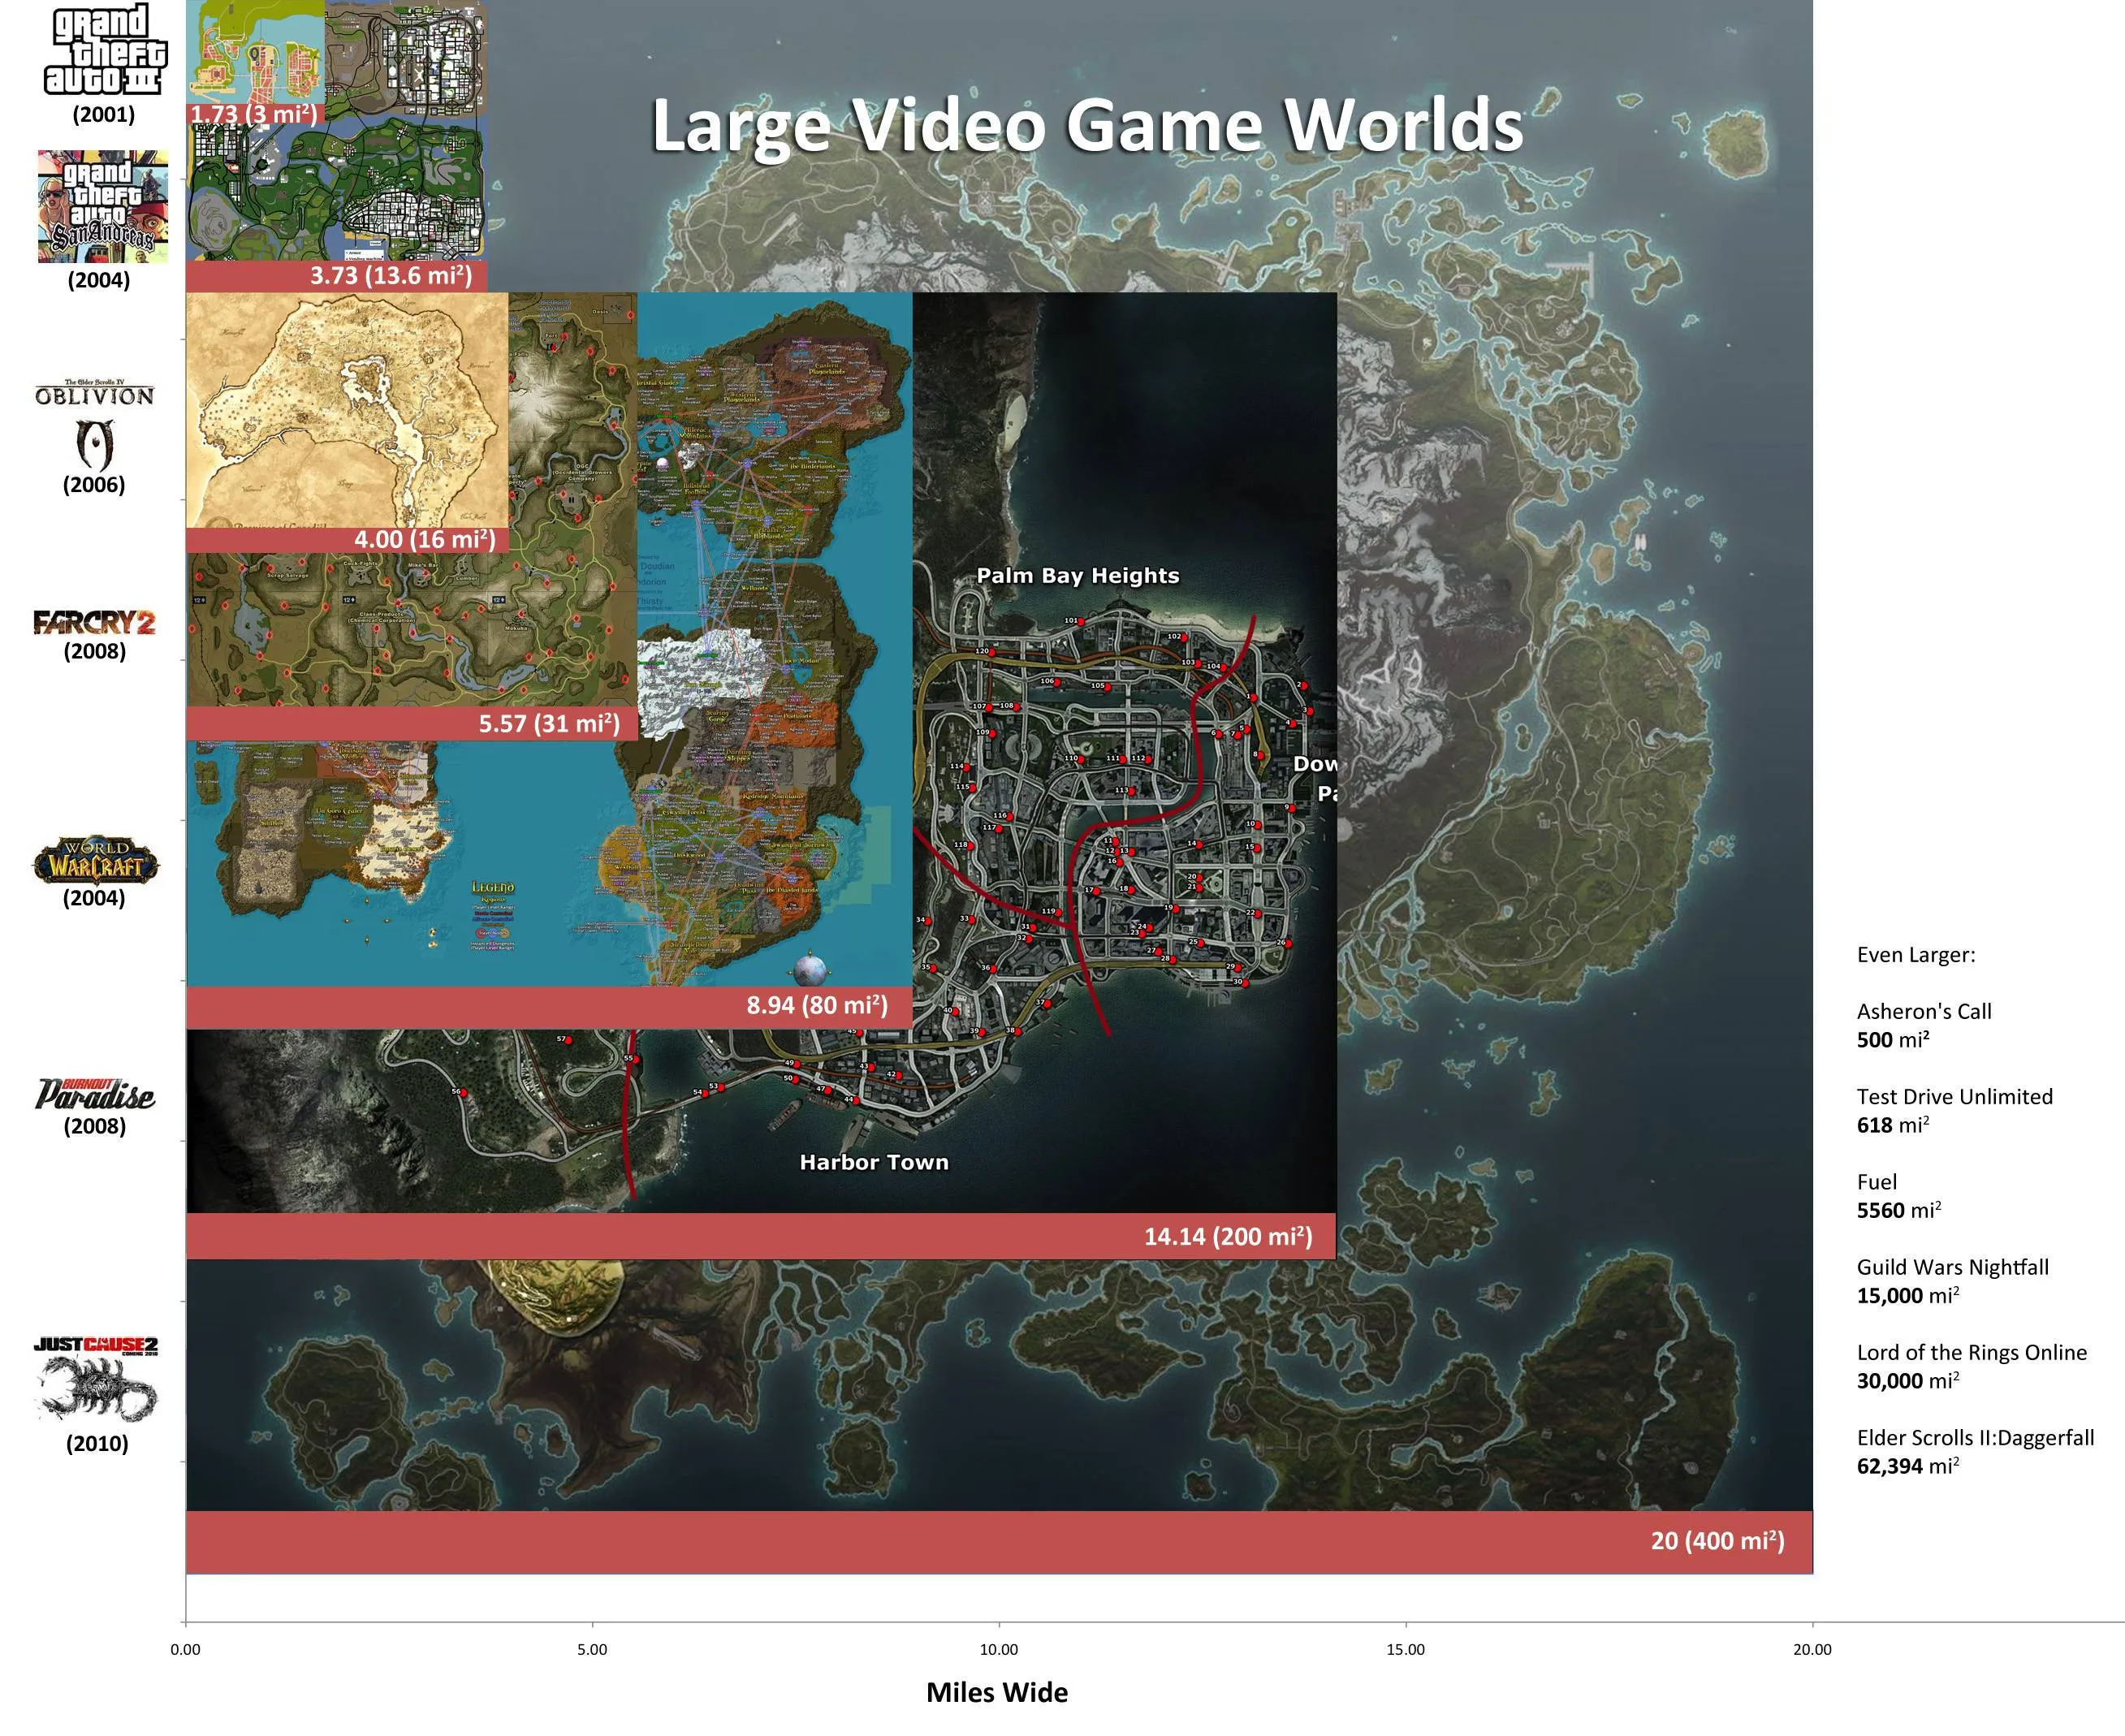 The Largest Video Game Worlds: A Visual Comparison | The Mary Sue